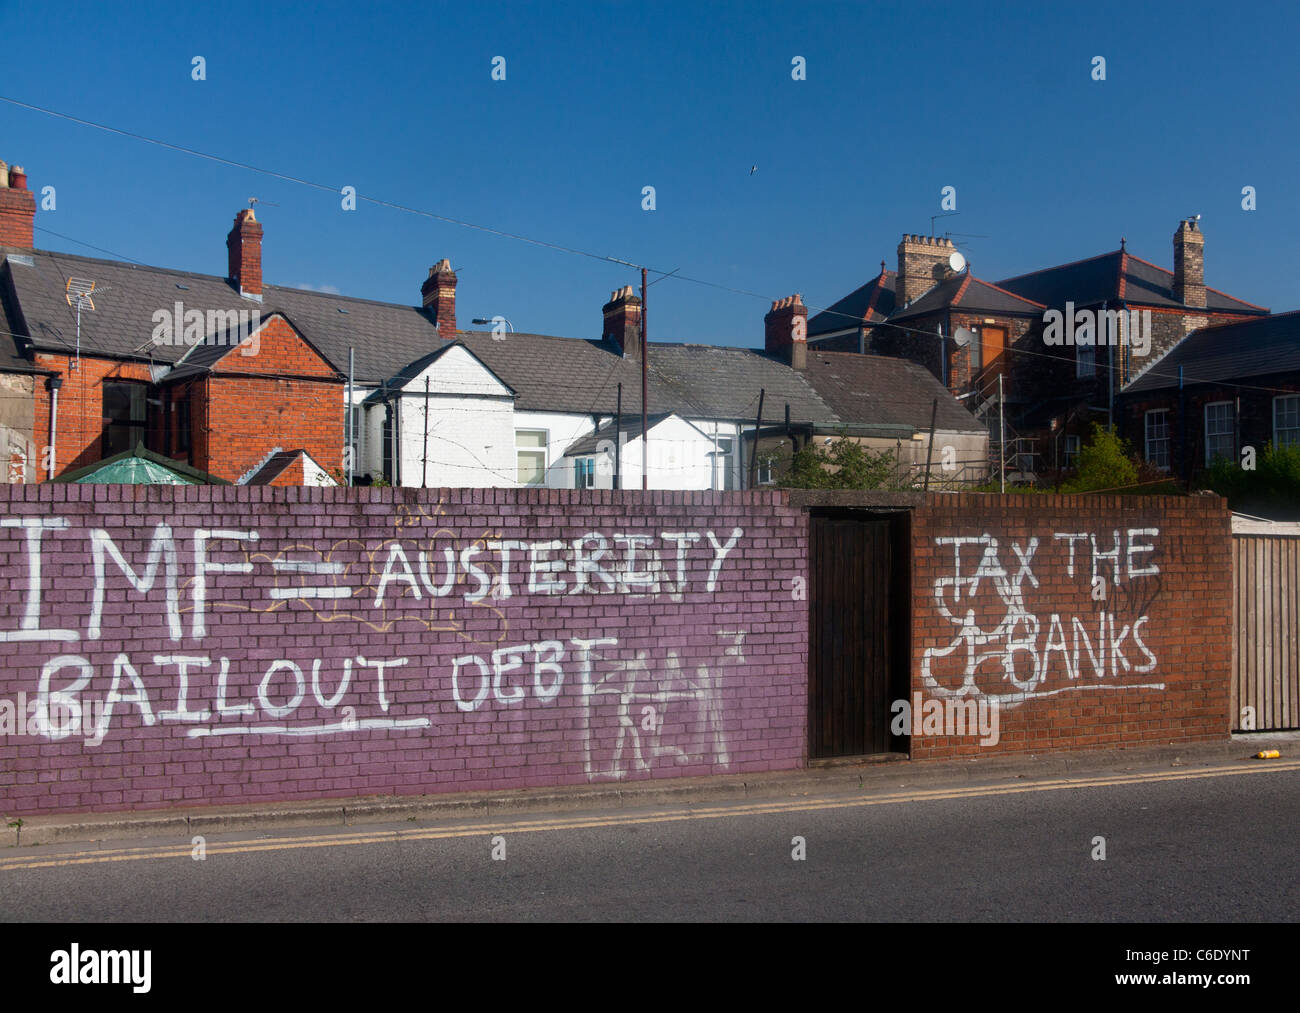 Political graffiti condemning economic policy IMF = Austerity Bailout Debt Tax The Banks White paint on red brick wall Stock Photo